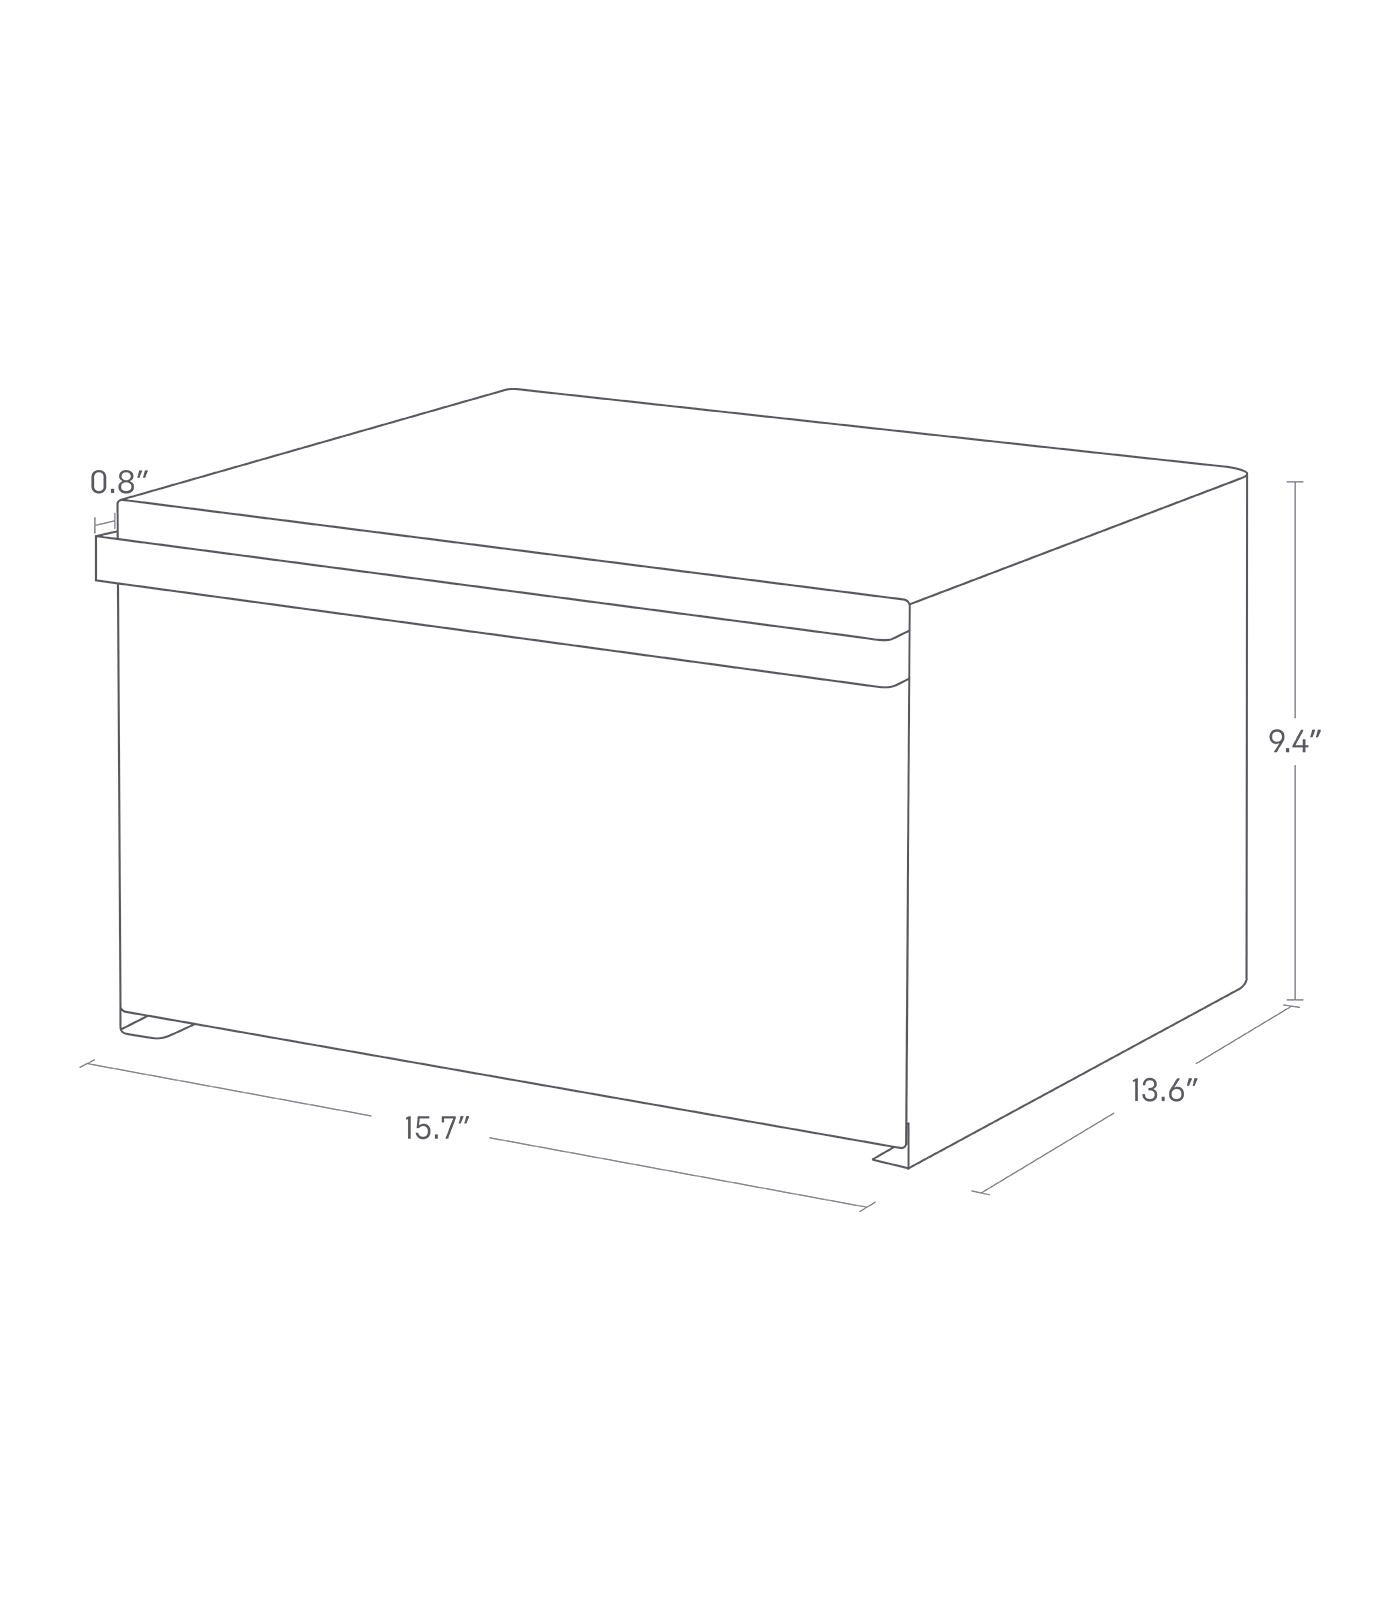 Dimension Image for Bread Box on a white background showing height of 9.4